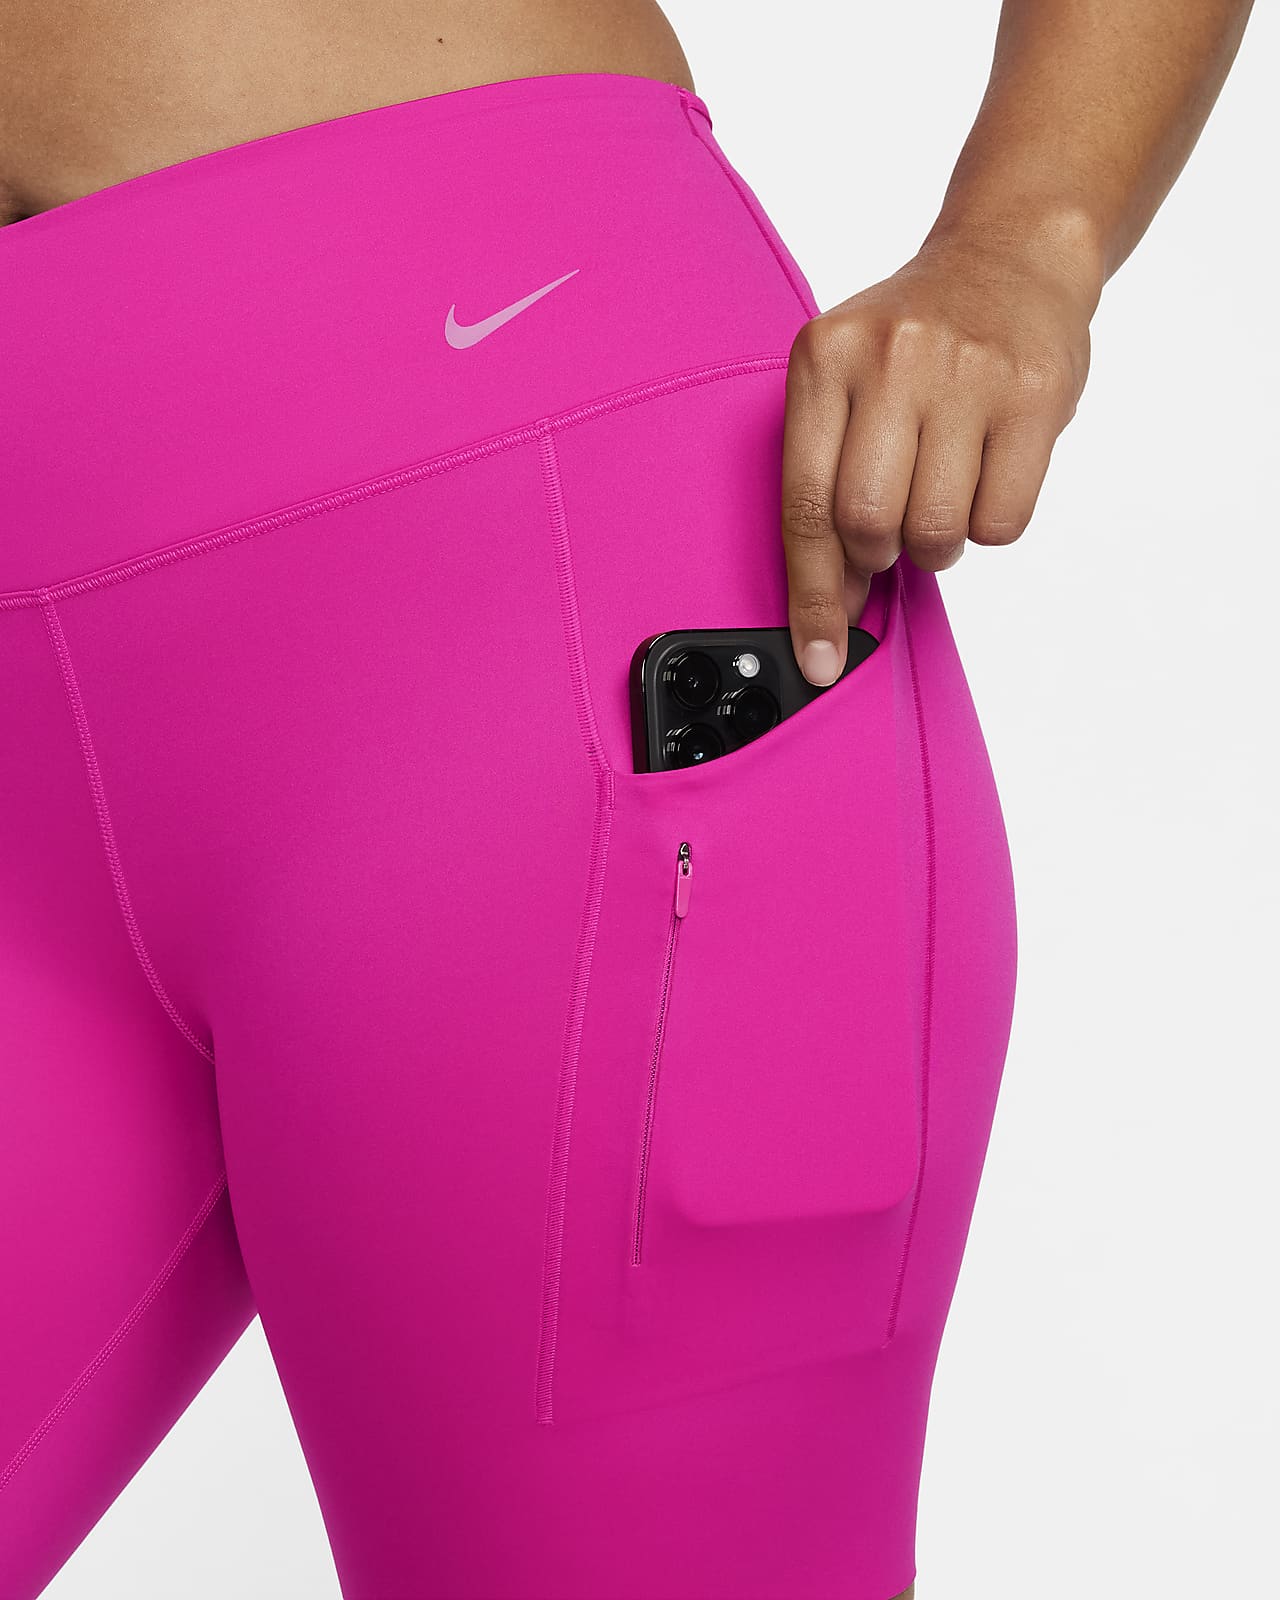 The new high-support Nike Go leggings have compression without the squeeze  (thanks InfinaLock fabric), a drawcord for adjustable snugness…